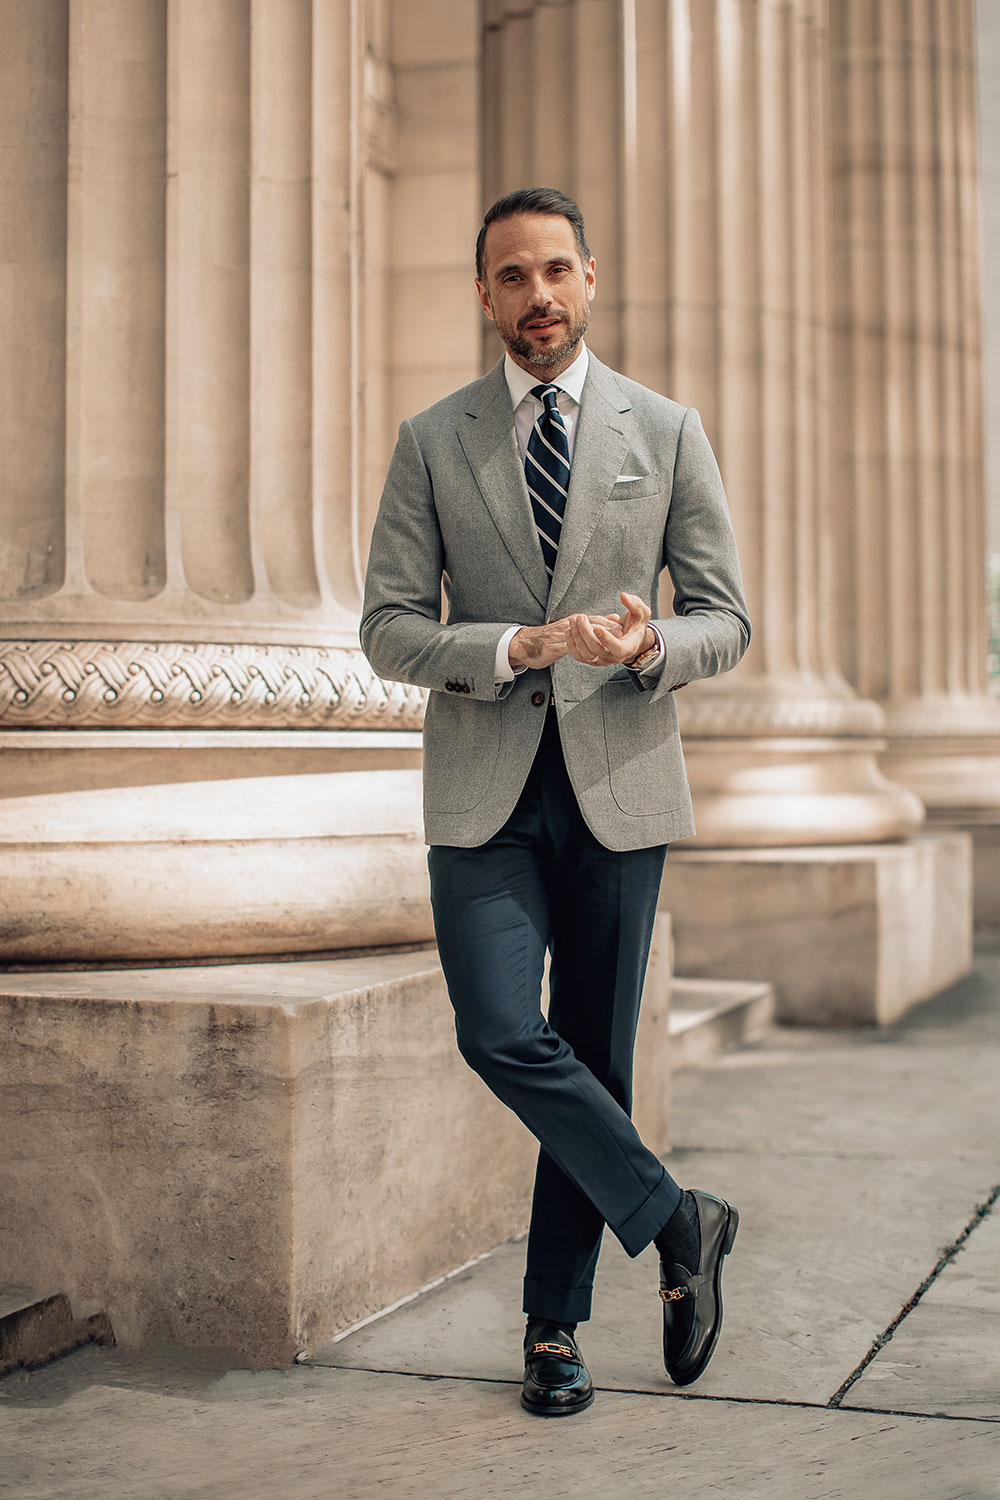 How To Do "Relaxed Business" This Fall | He Spoke Style